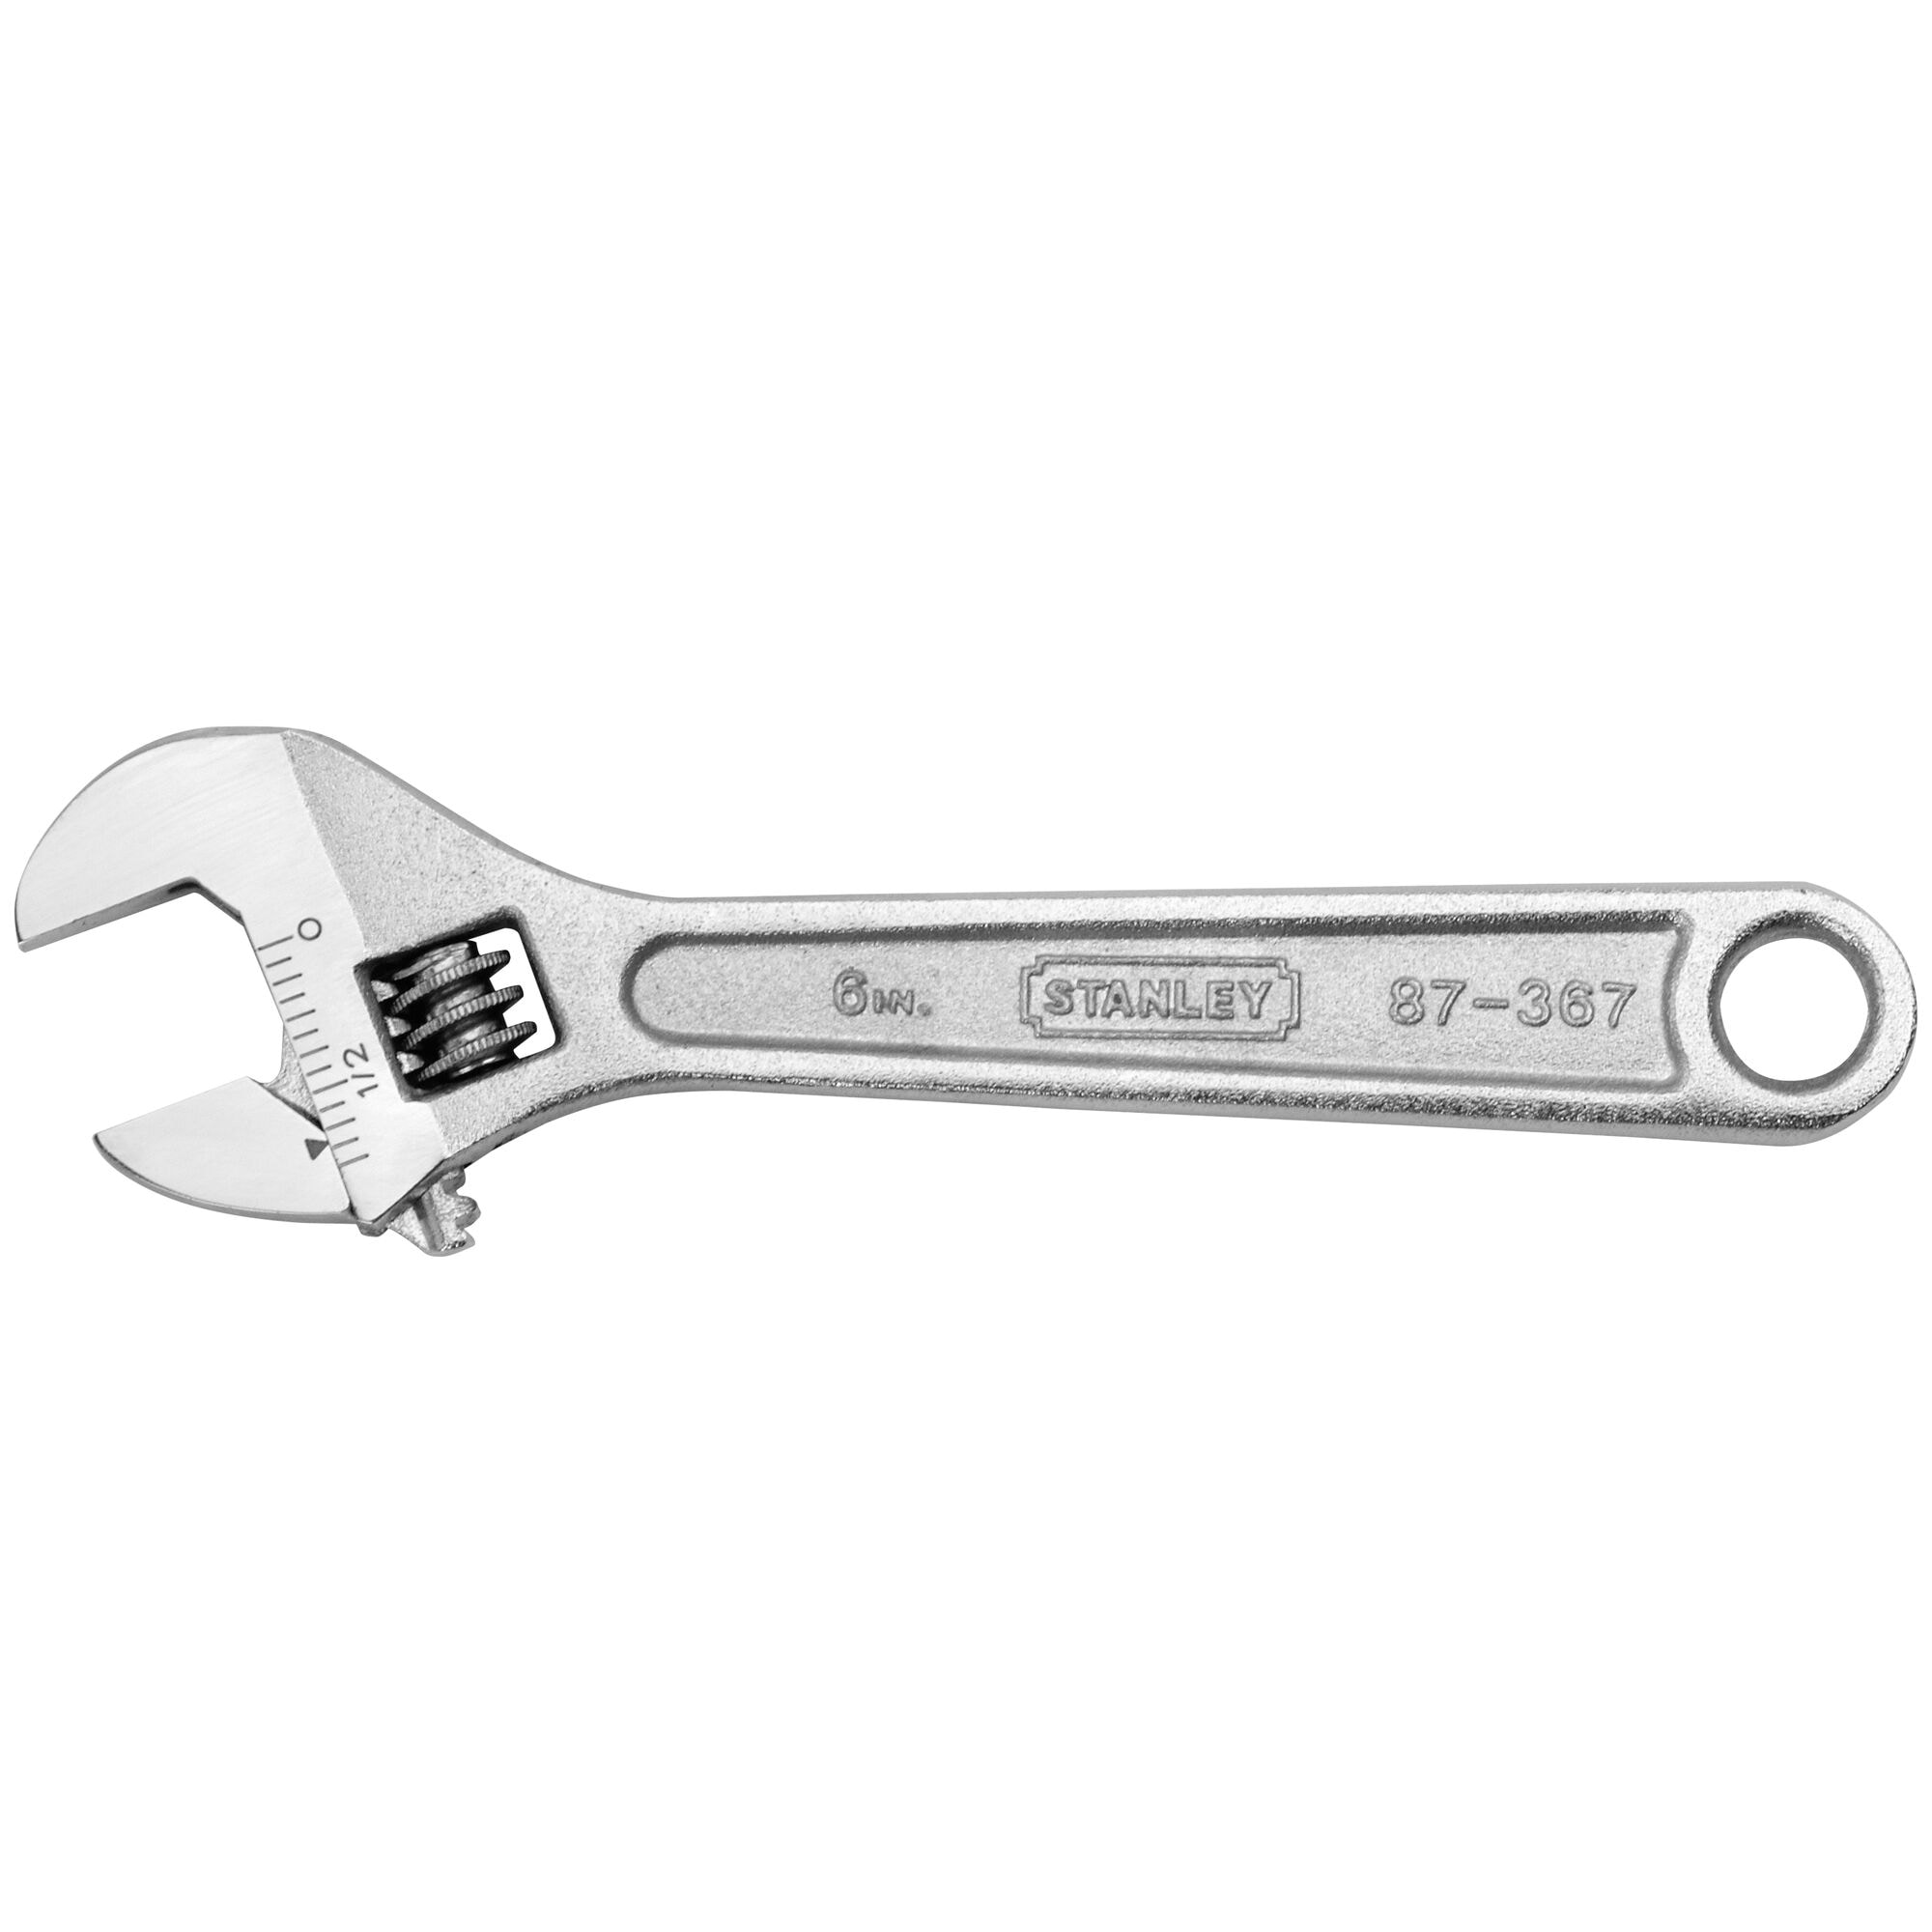 STANLEY Adjustable Wrench 8 Inch Satin CHN 87-369 